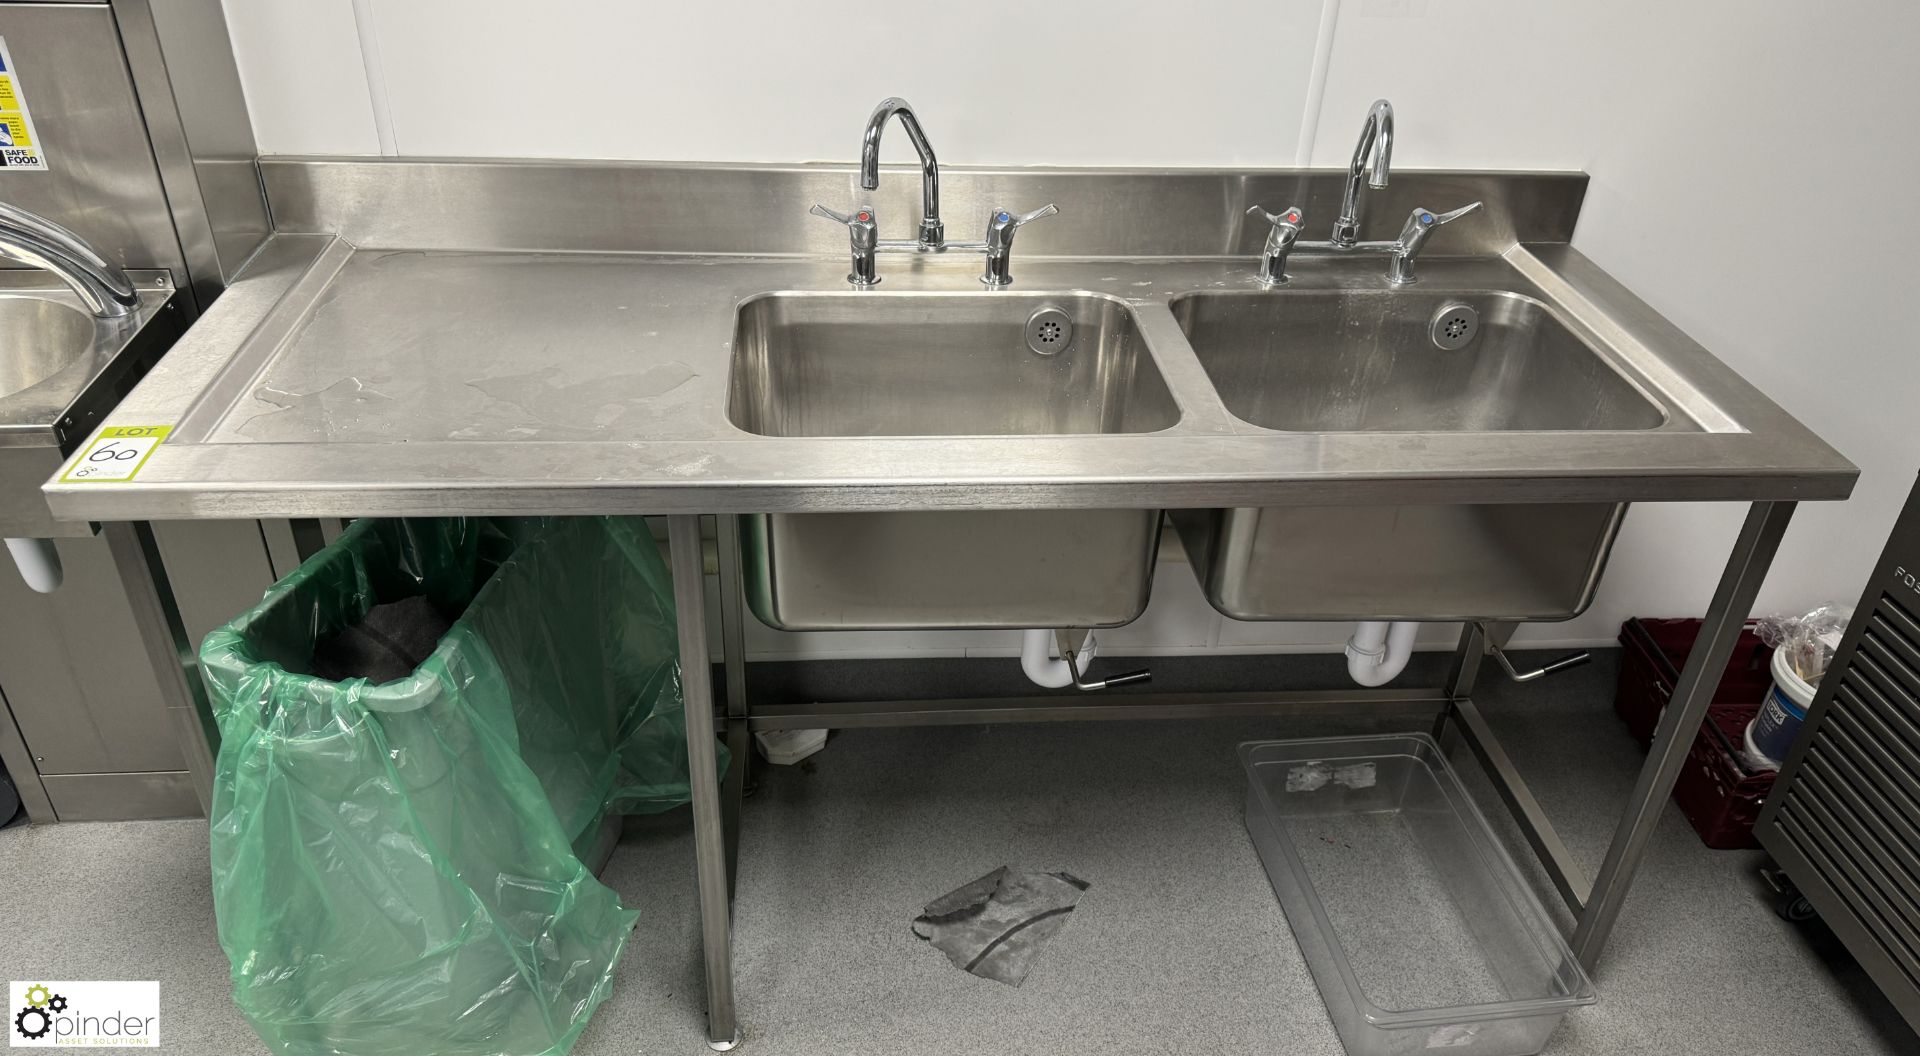 Stainless steel twin bowl Sink, 1800mm x 700mm x 880mm (location in building – basement kitchen 2)